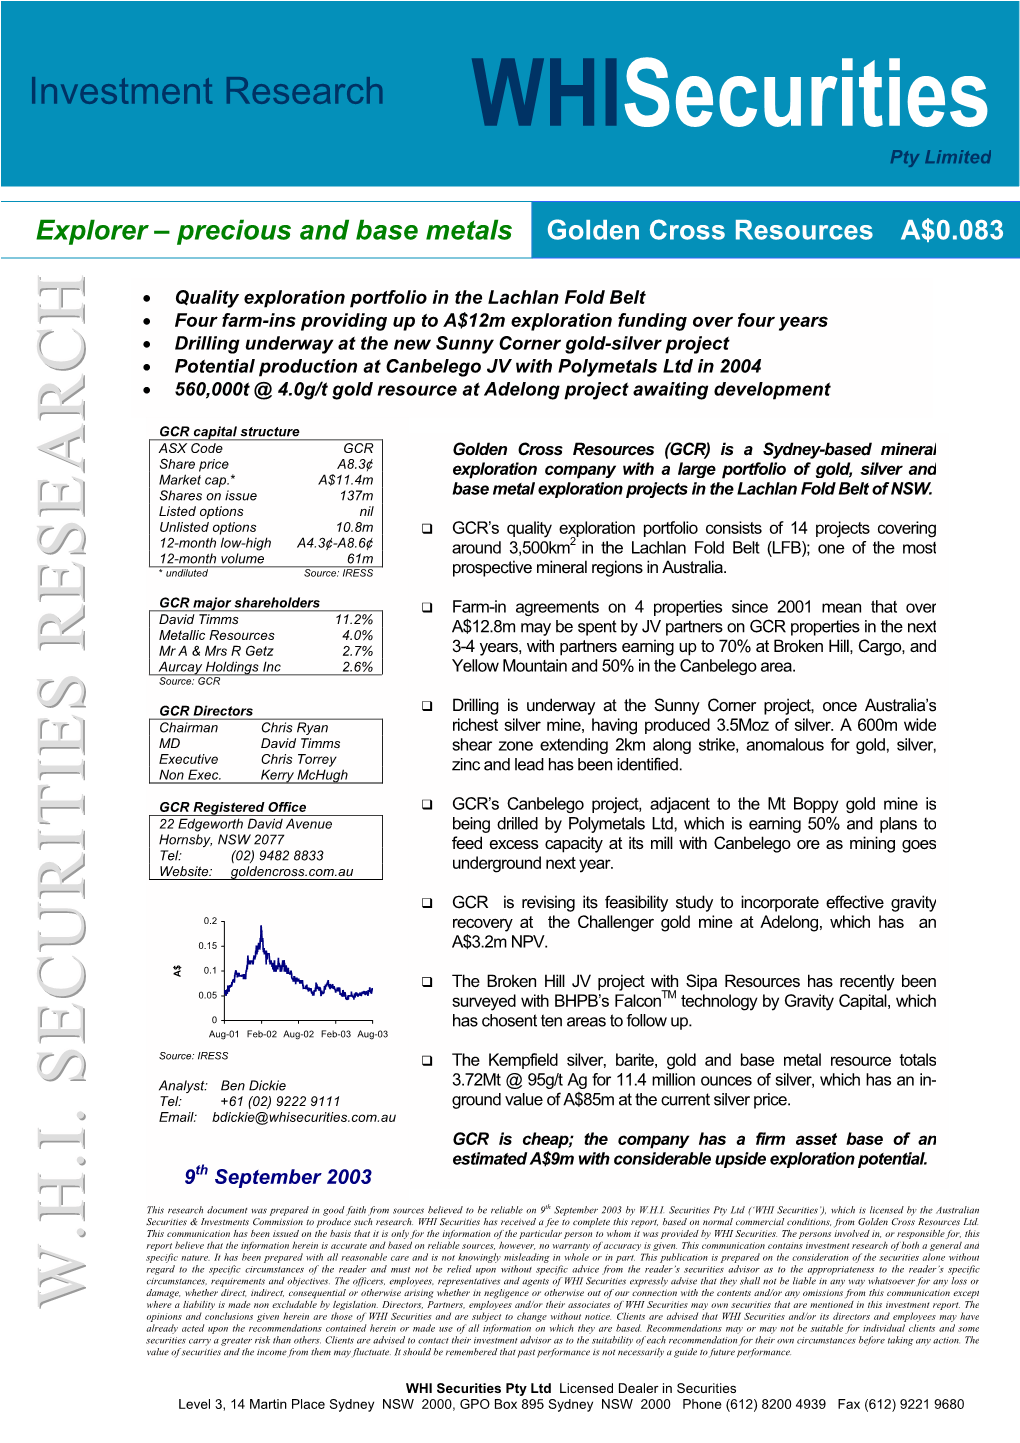 Investment Research Whisecurities Pty Limited